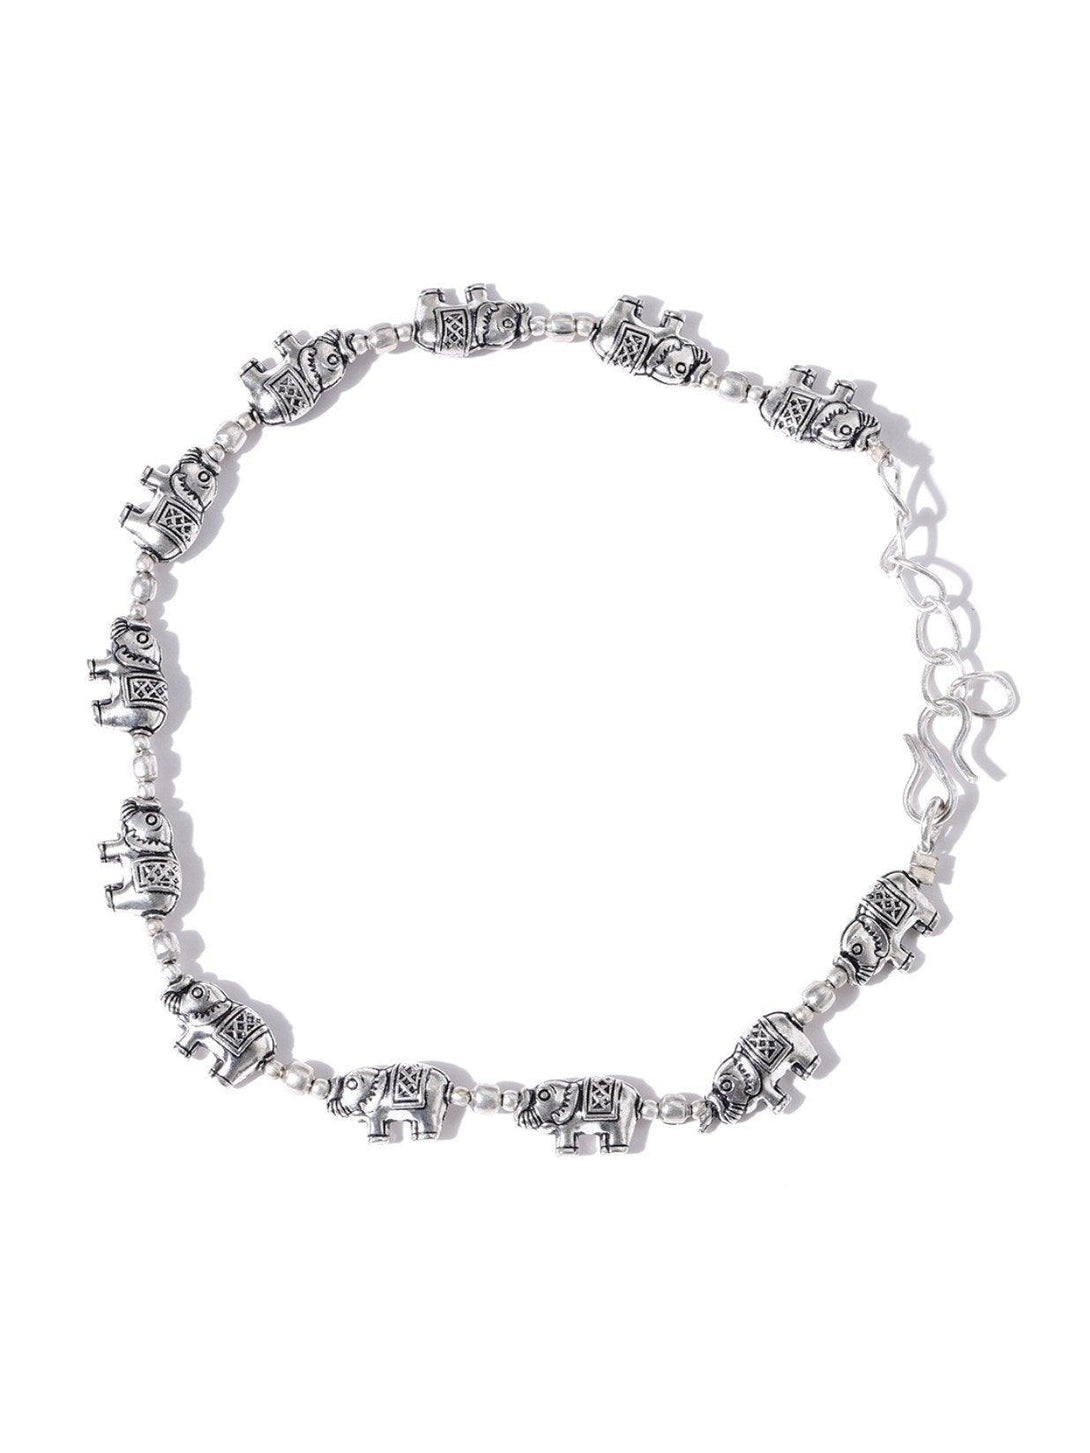 Women's Oxidised Silver Elephant Inspired Anklet for Women & Girls - Priyaasi - Indiakreations